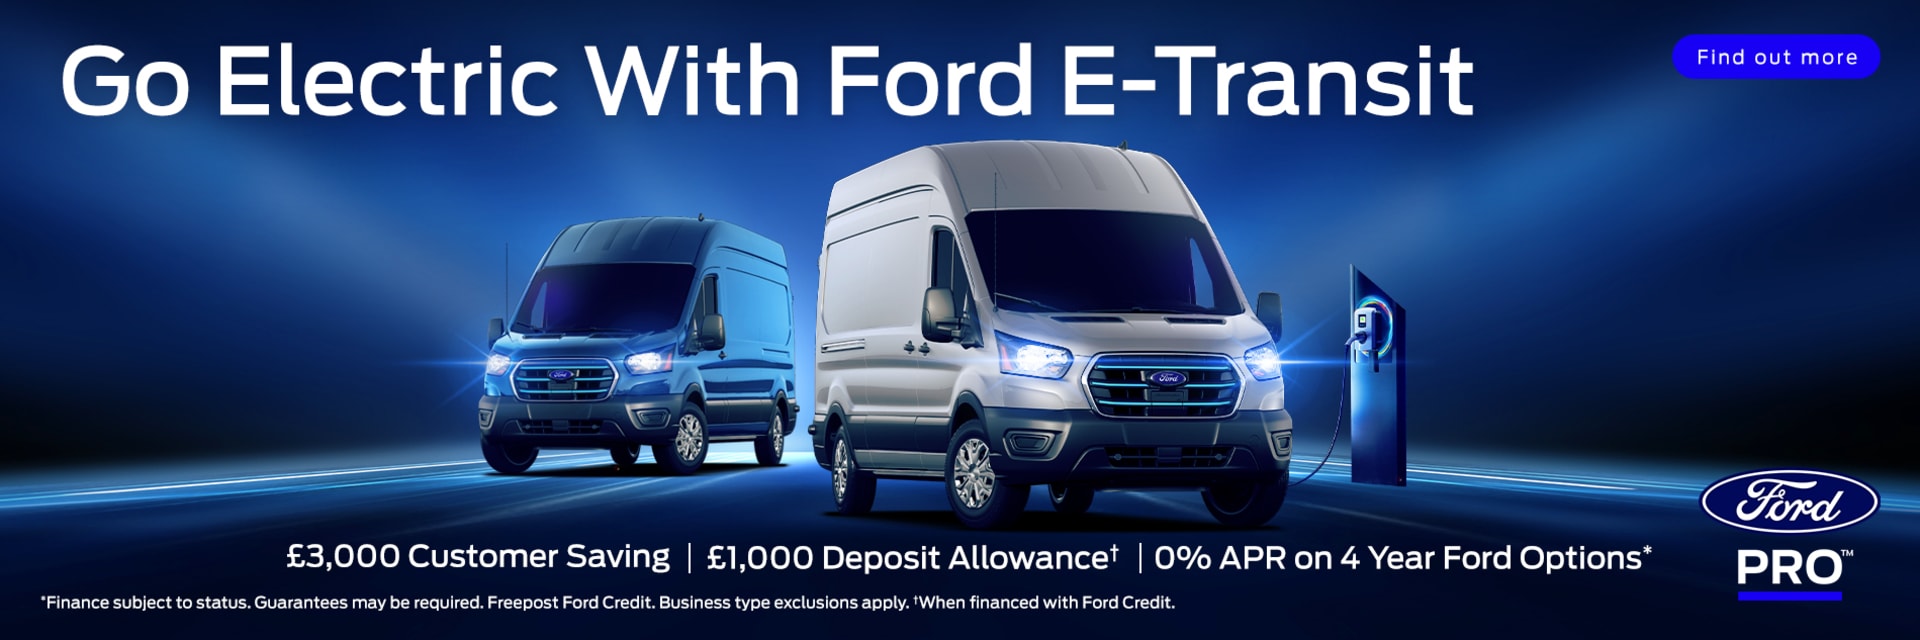 Go Electric With Ford E-Transit